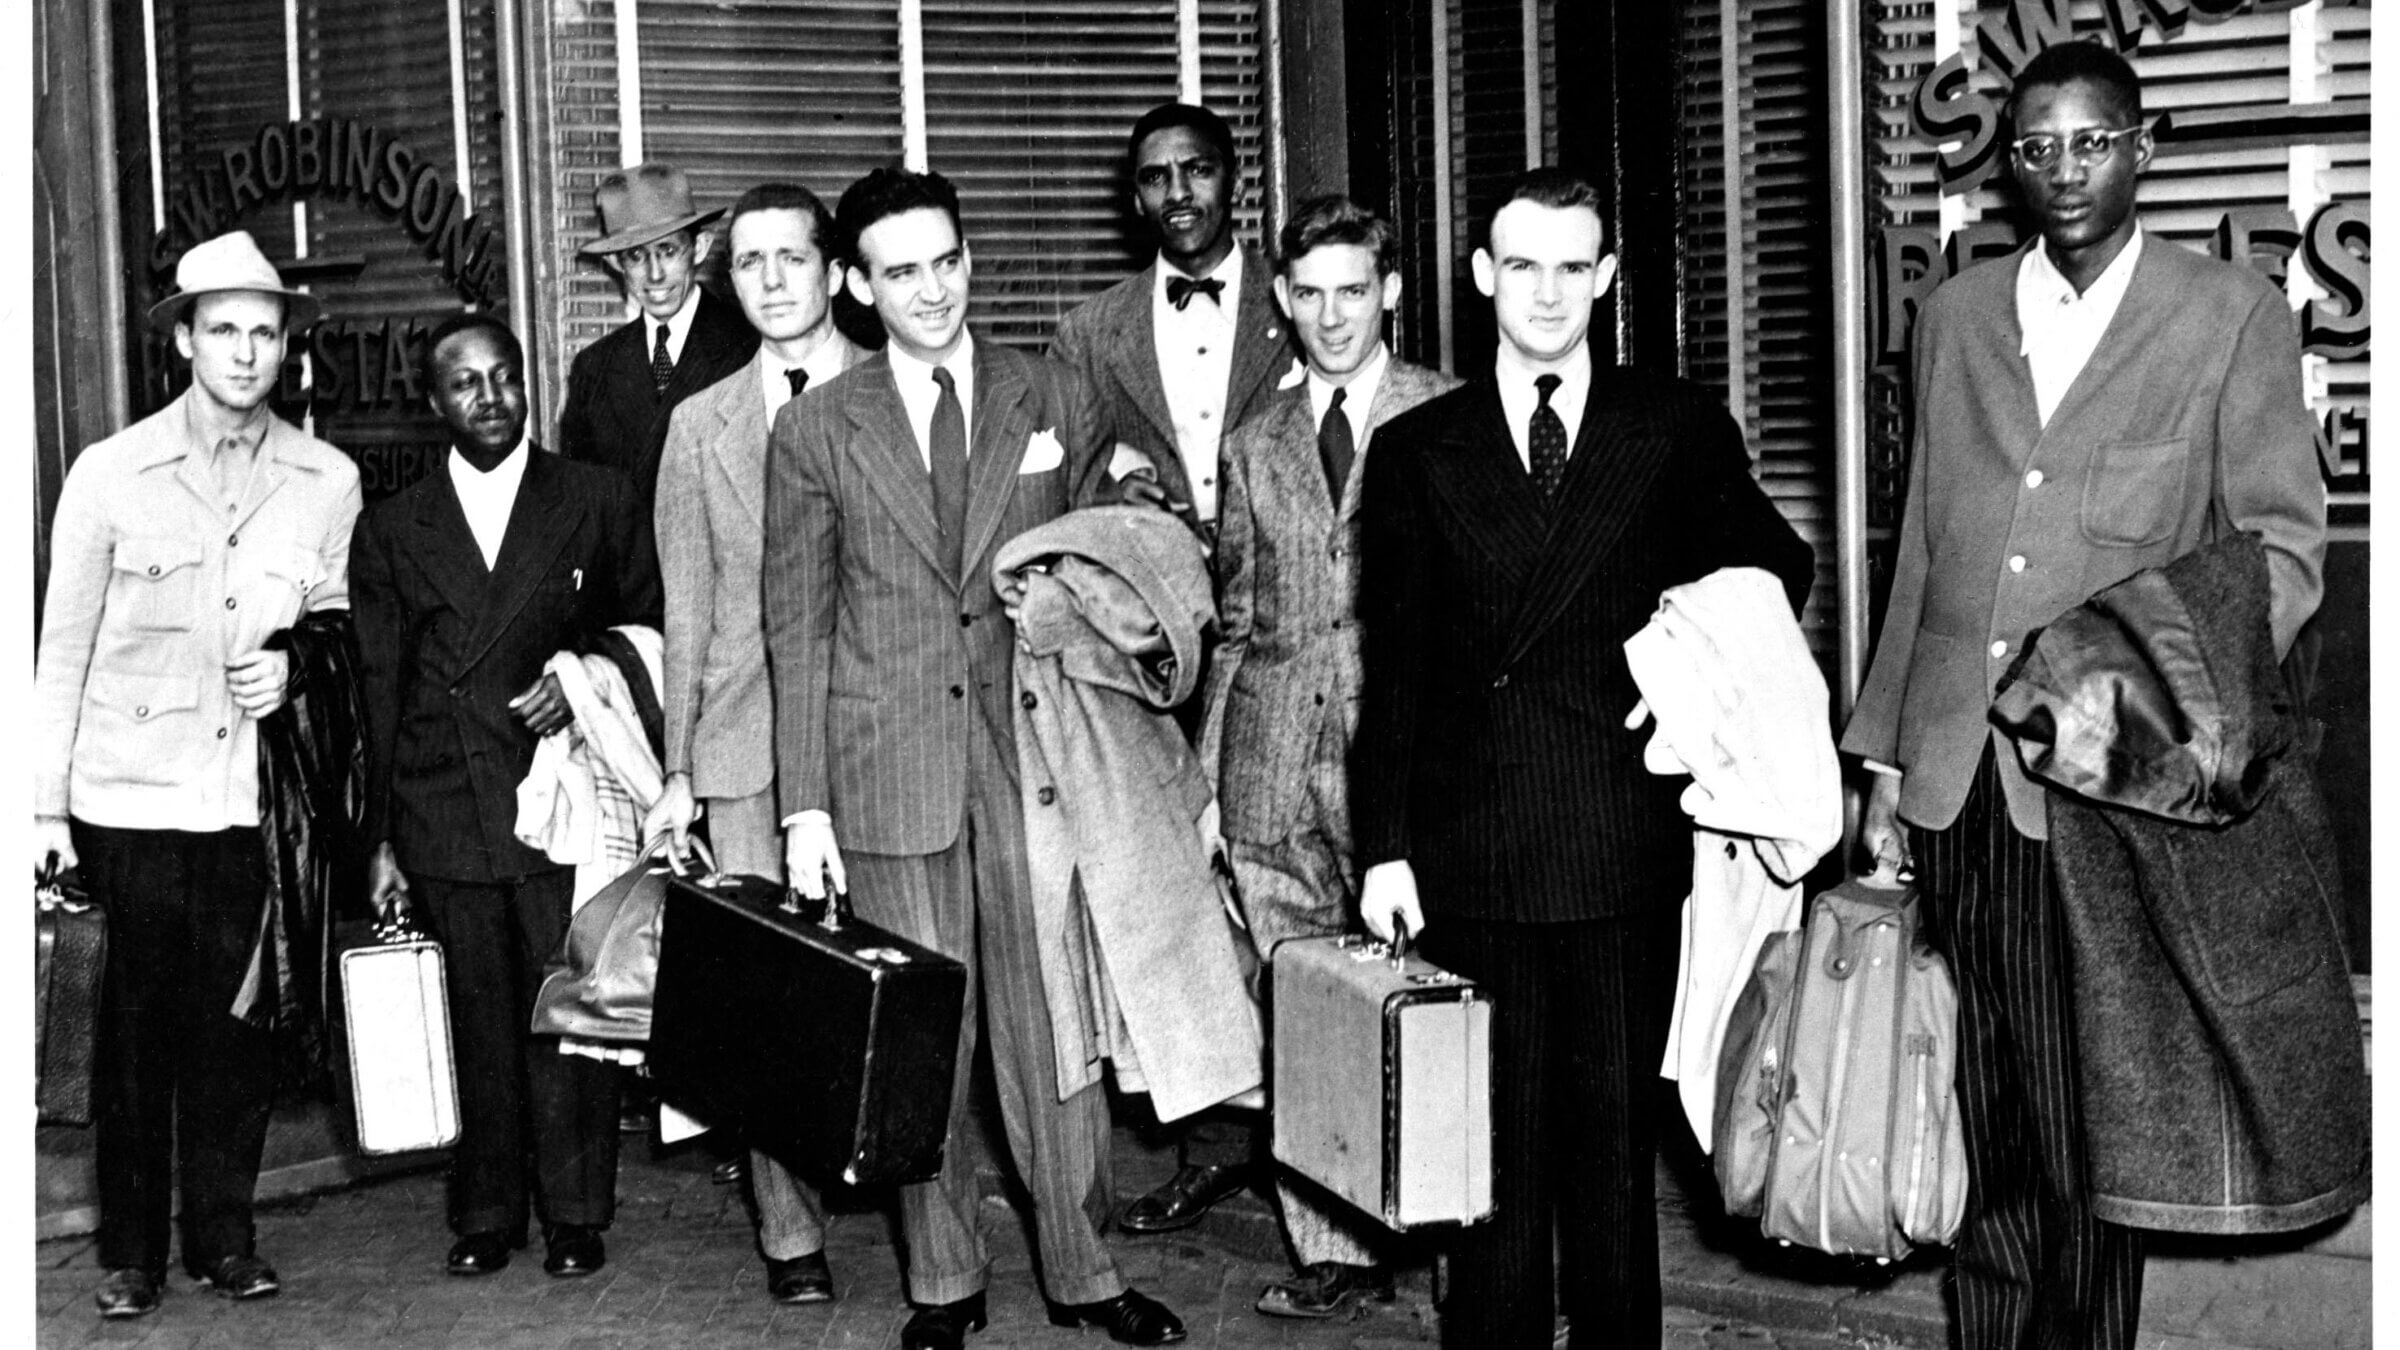 The participants of the 1947 Journey of Reconciliation, a forerunner of later freedom rides. From left: Worth Randle, Wally Nelson, Ernest Bromley, Jim Peck, Igal Roodenko, Bayard Rustin, Joe Felmet, George Houser, and Andrew Johnson, outside of NAACP lawyer Spottswood Robinson's law office in Richmond, Va., on April 10, 1947.